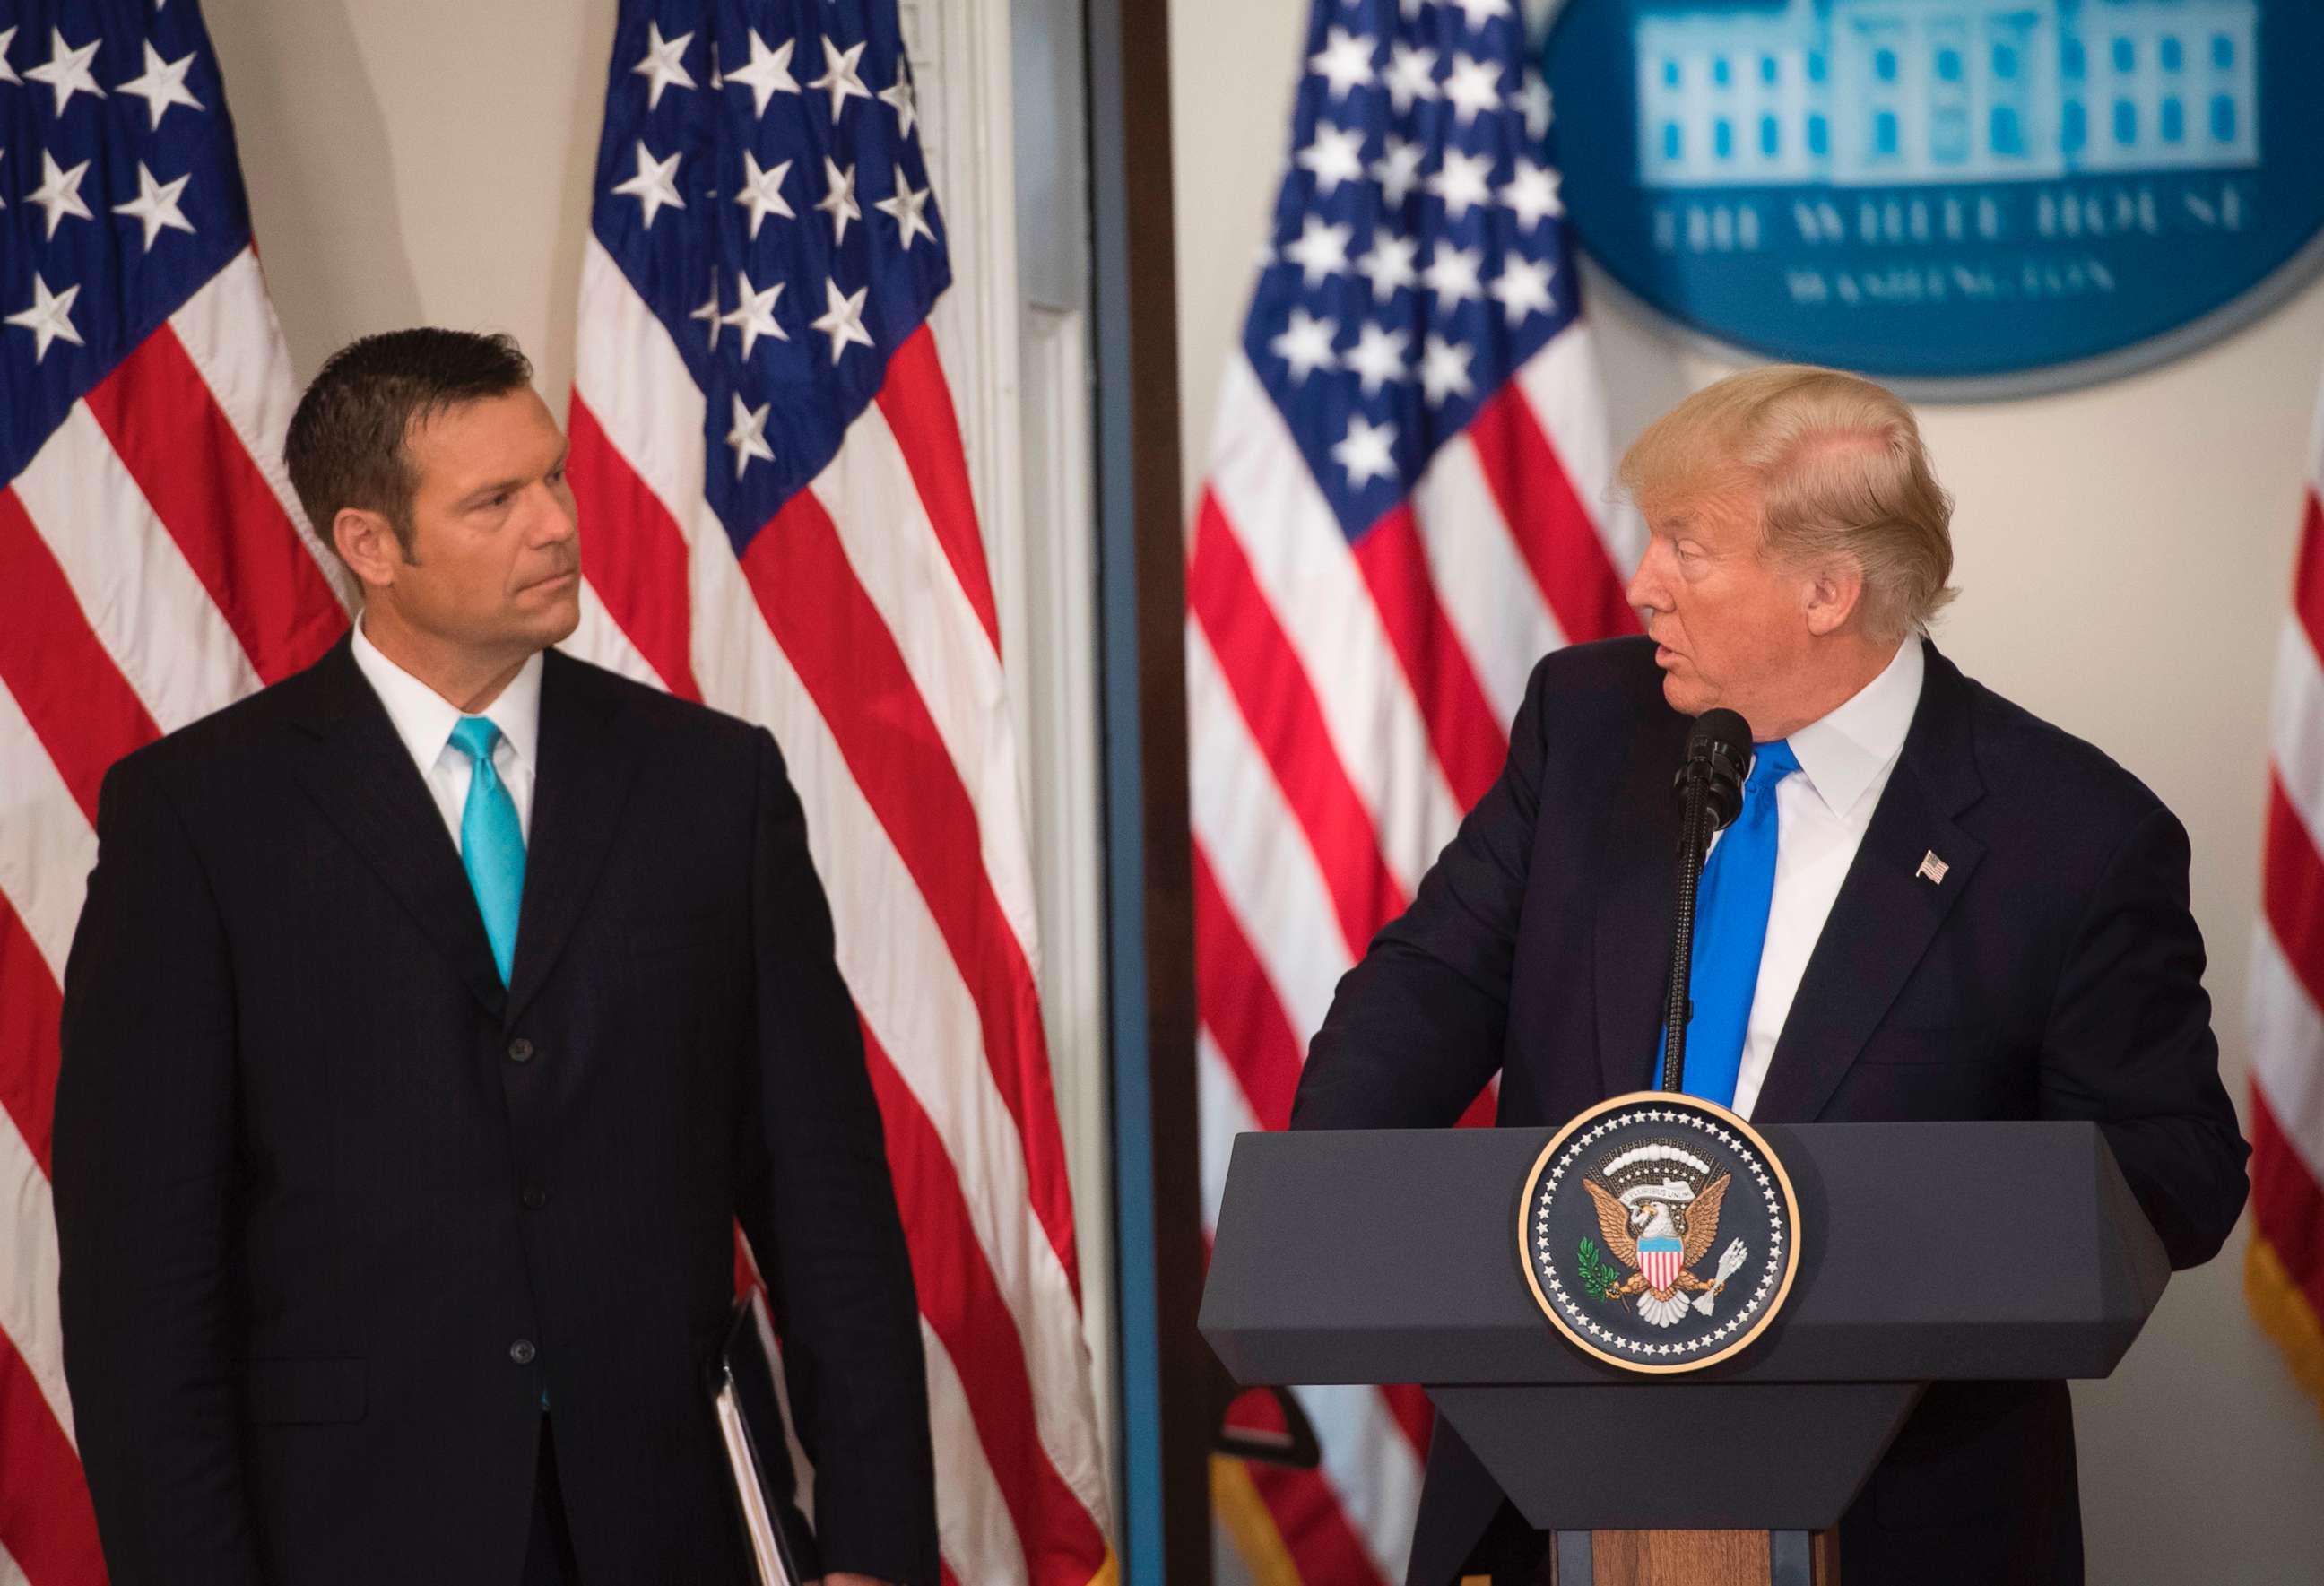 PHOTO: President Donald Trump speaks alongside Kansas Secretary of State Kris Kobach (L) during the first meeting of the Presidential Advisory Commission on Election Integrity in the Eisenhower Executive Office Building in Washington, D.C., July 19, 2017.